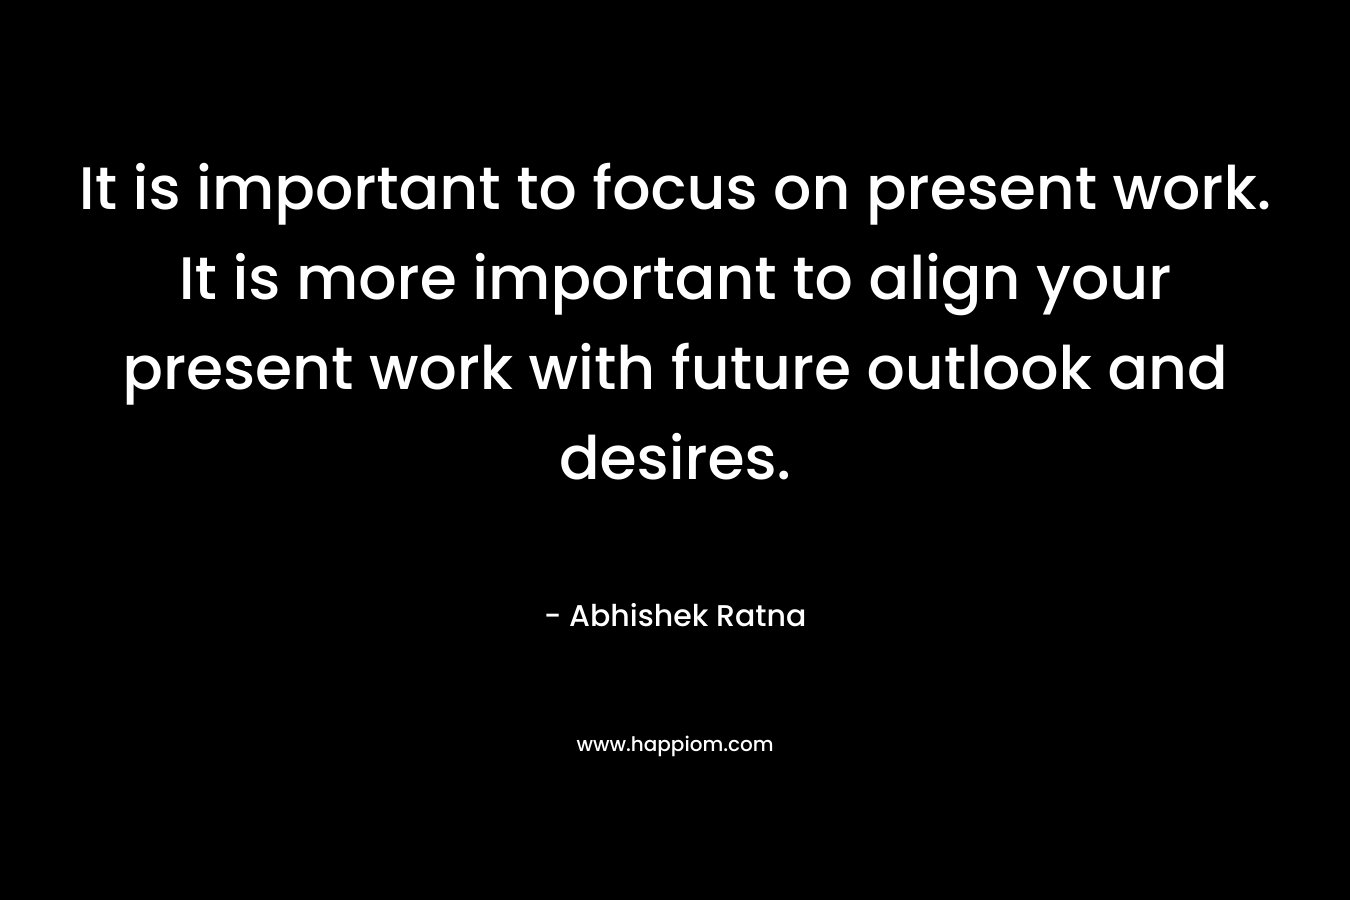 It is important to focus on present work. It is more important to align your present work with future outlook and desires.